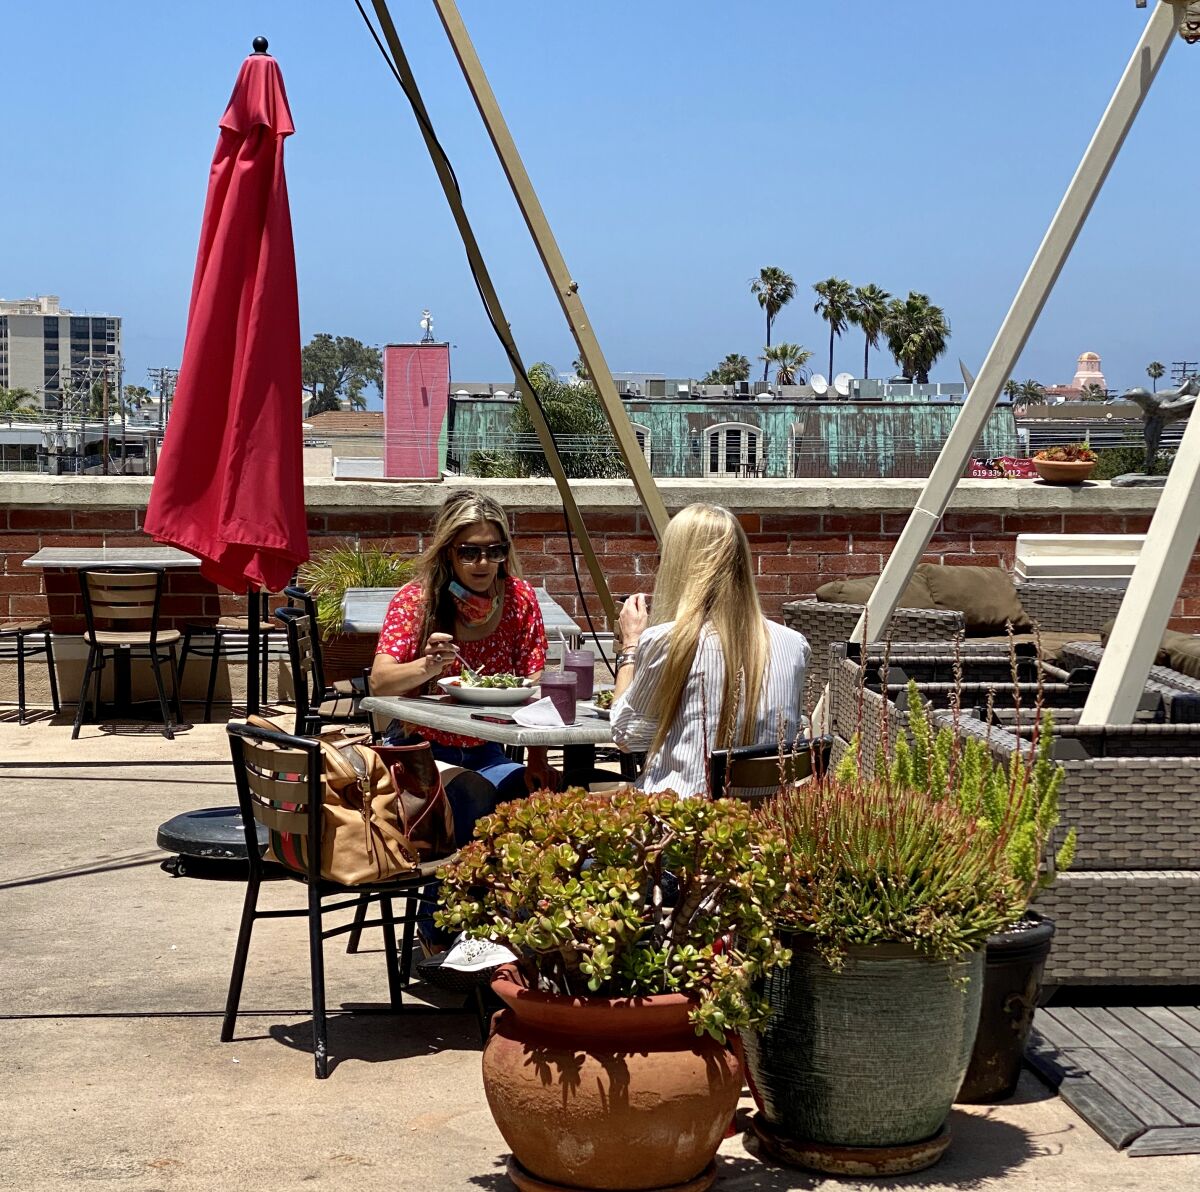 Customers eat at Trilogy Sanctuary's newly reopened rooftop cafe May 22 in La Jolla. Tables are spaced 10 feet apart for social distancing.